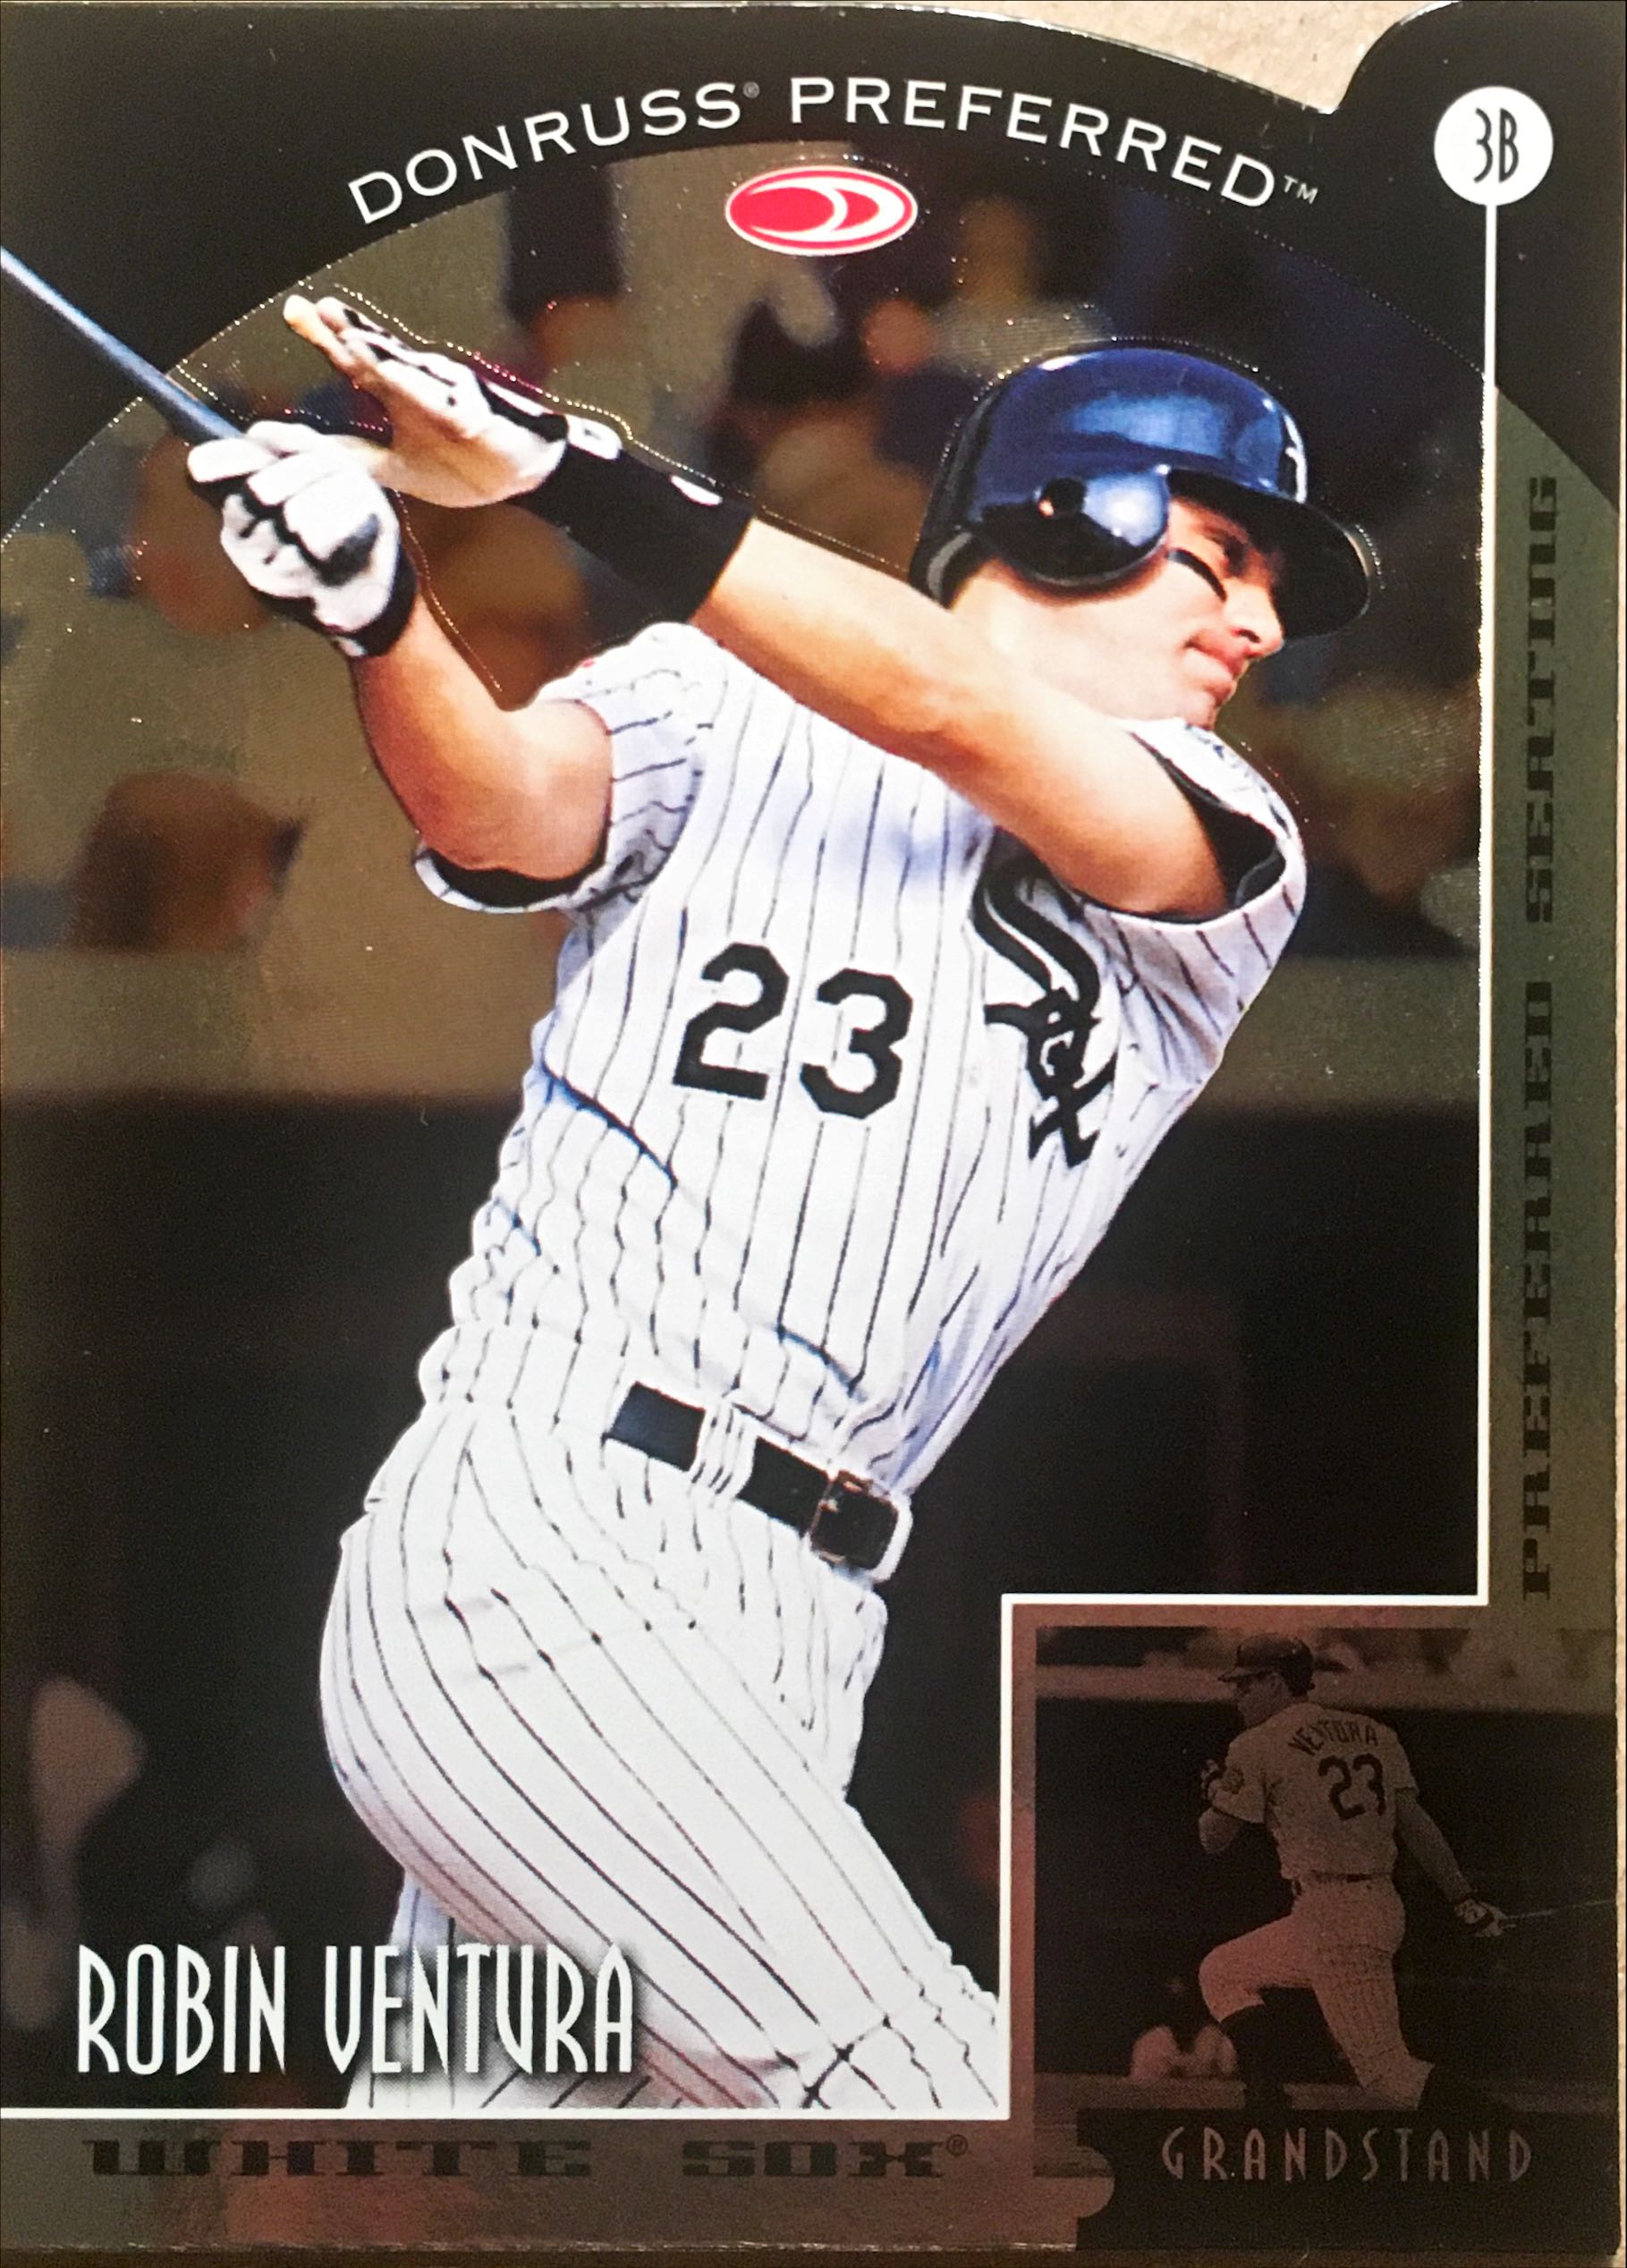 1998 Donruss Preferred Seating 82 front image